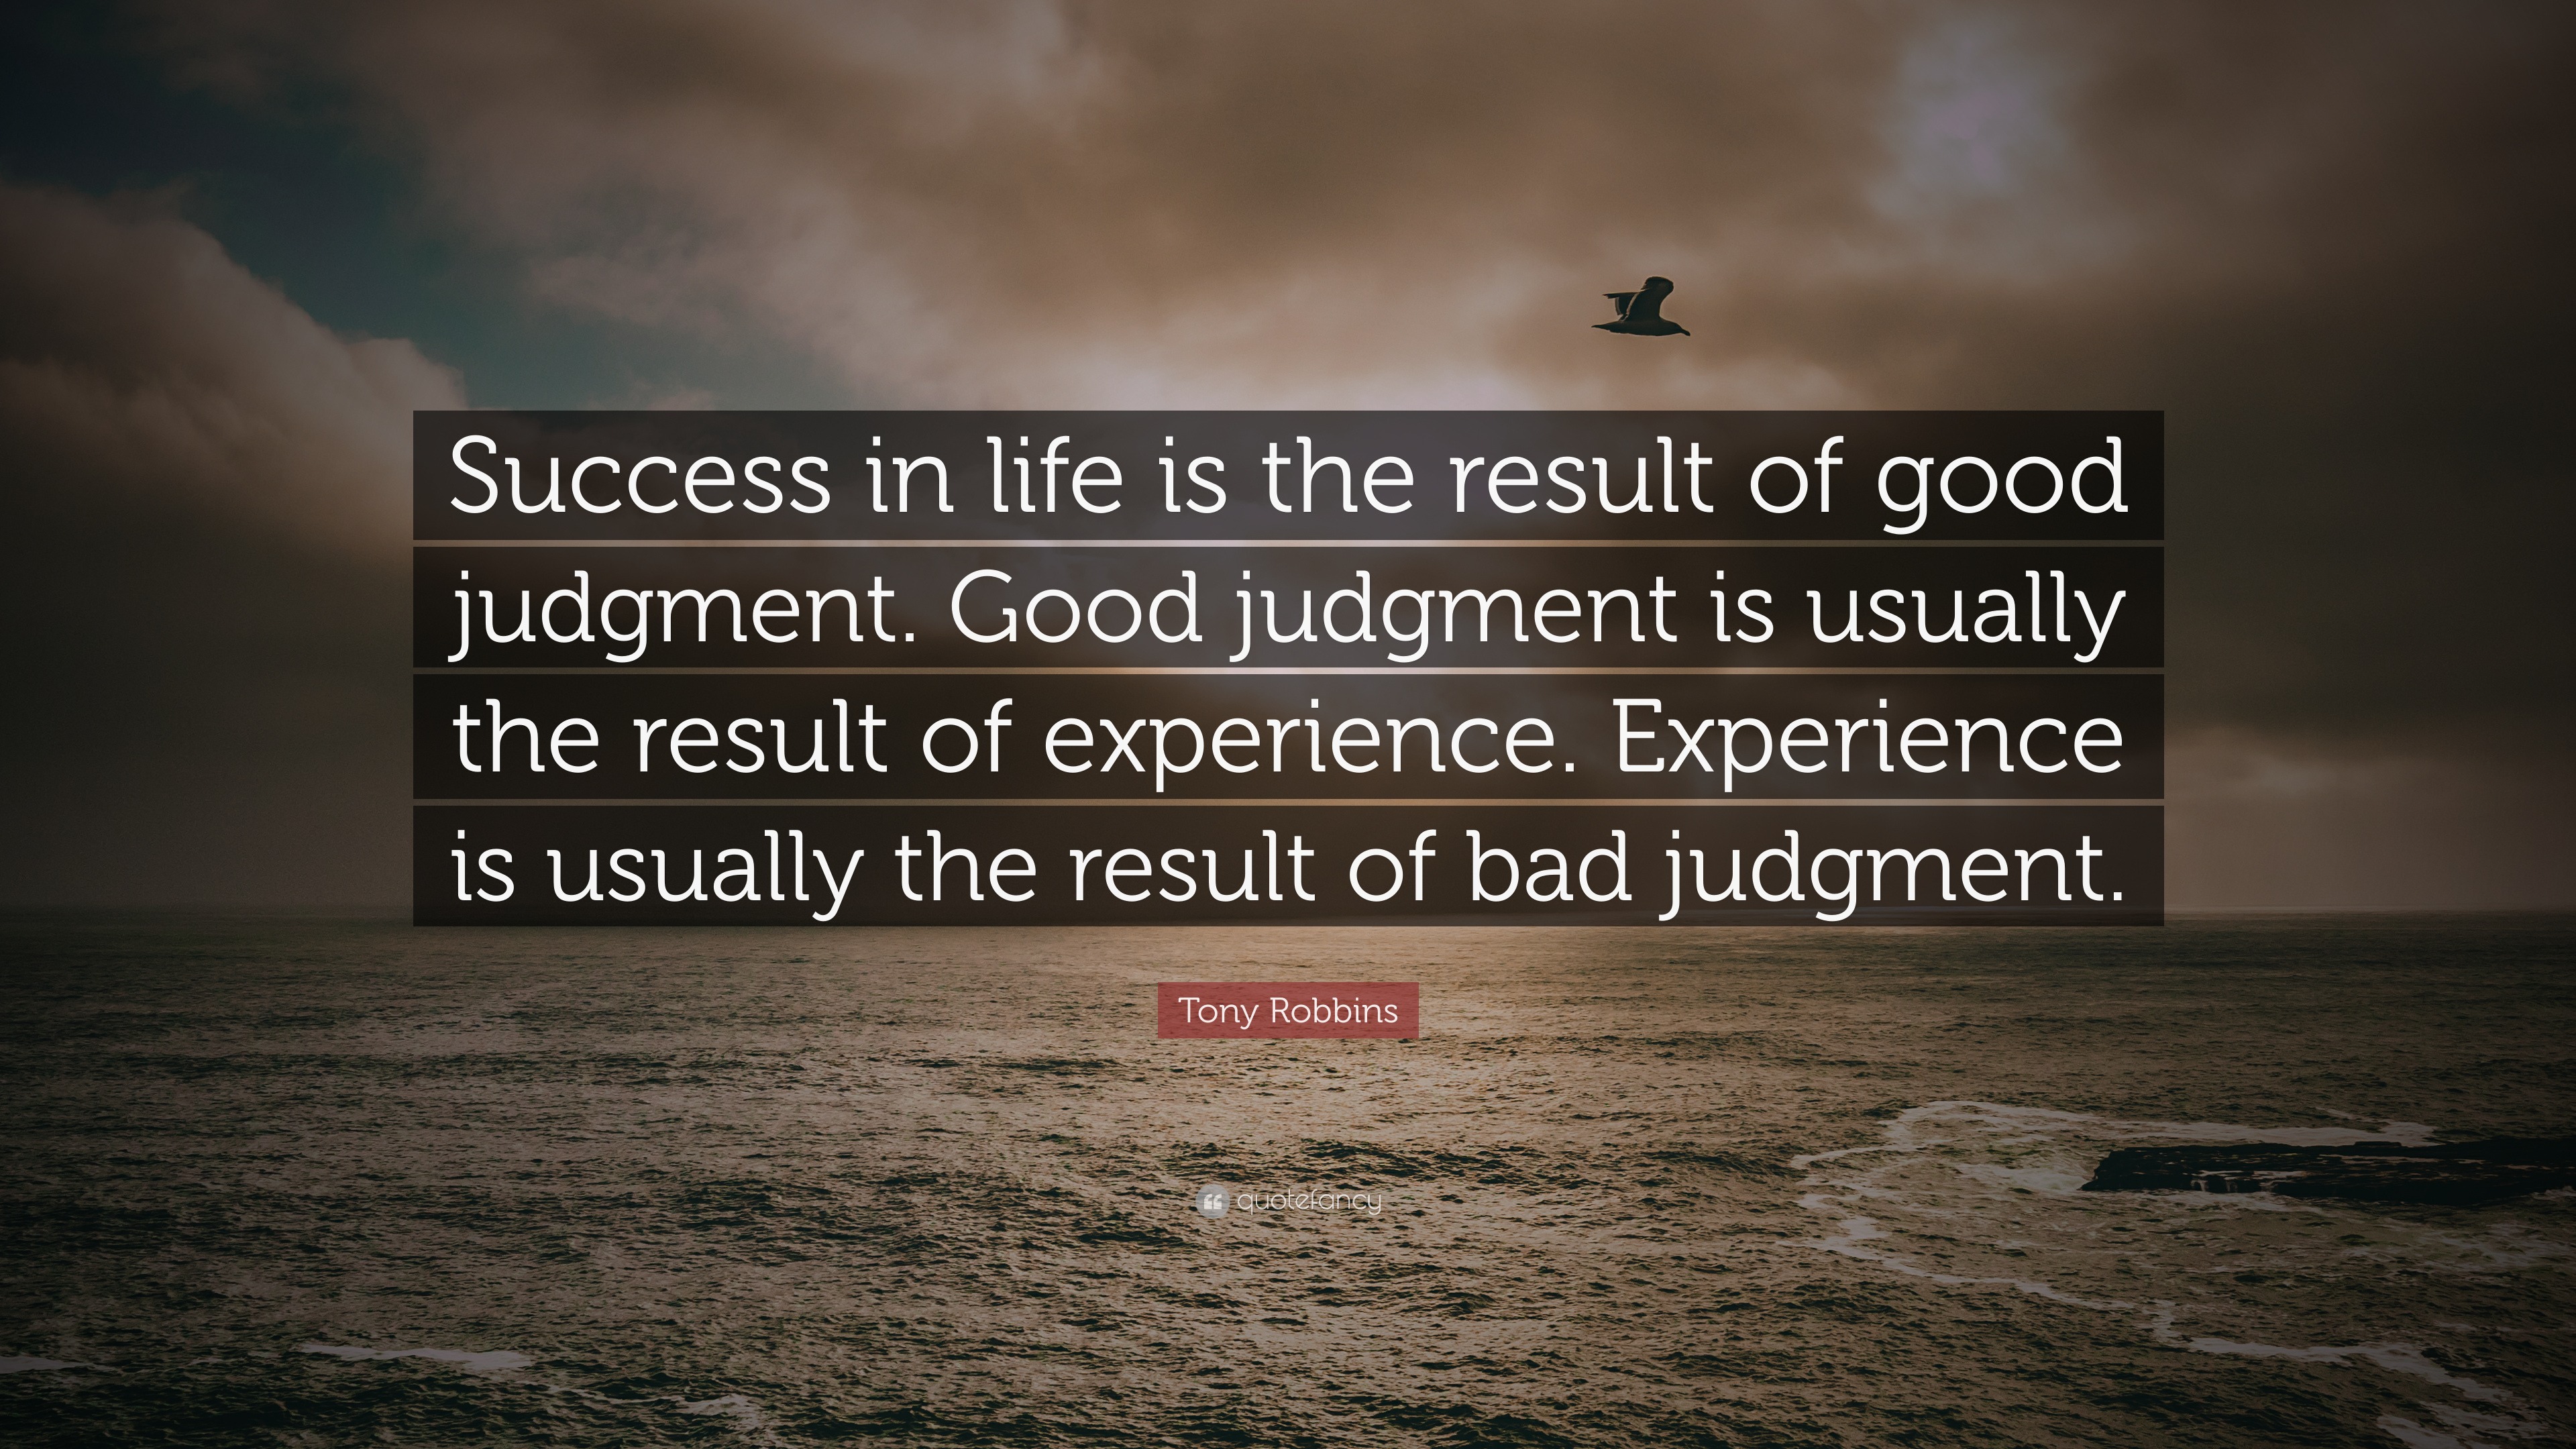 Tony Robbins Quote “Success in life is the result of good judgment Good